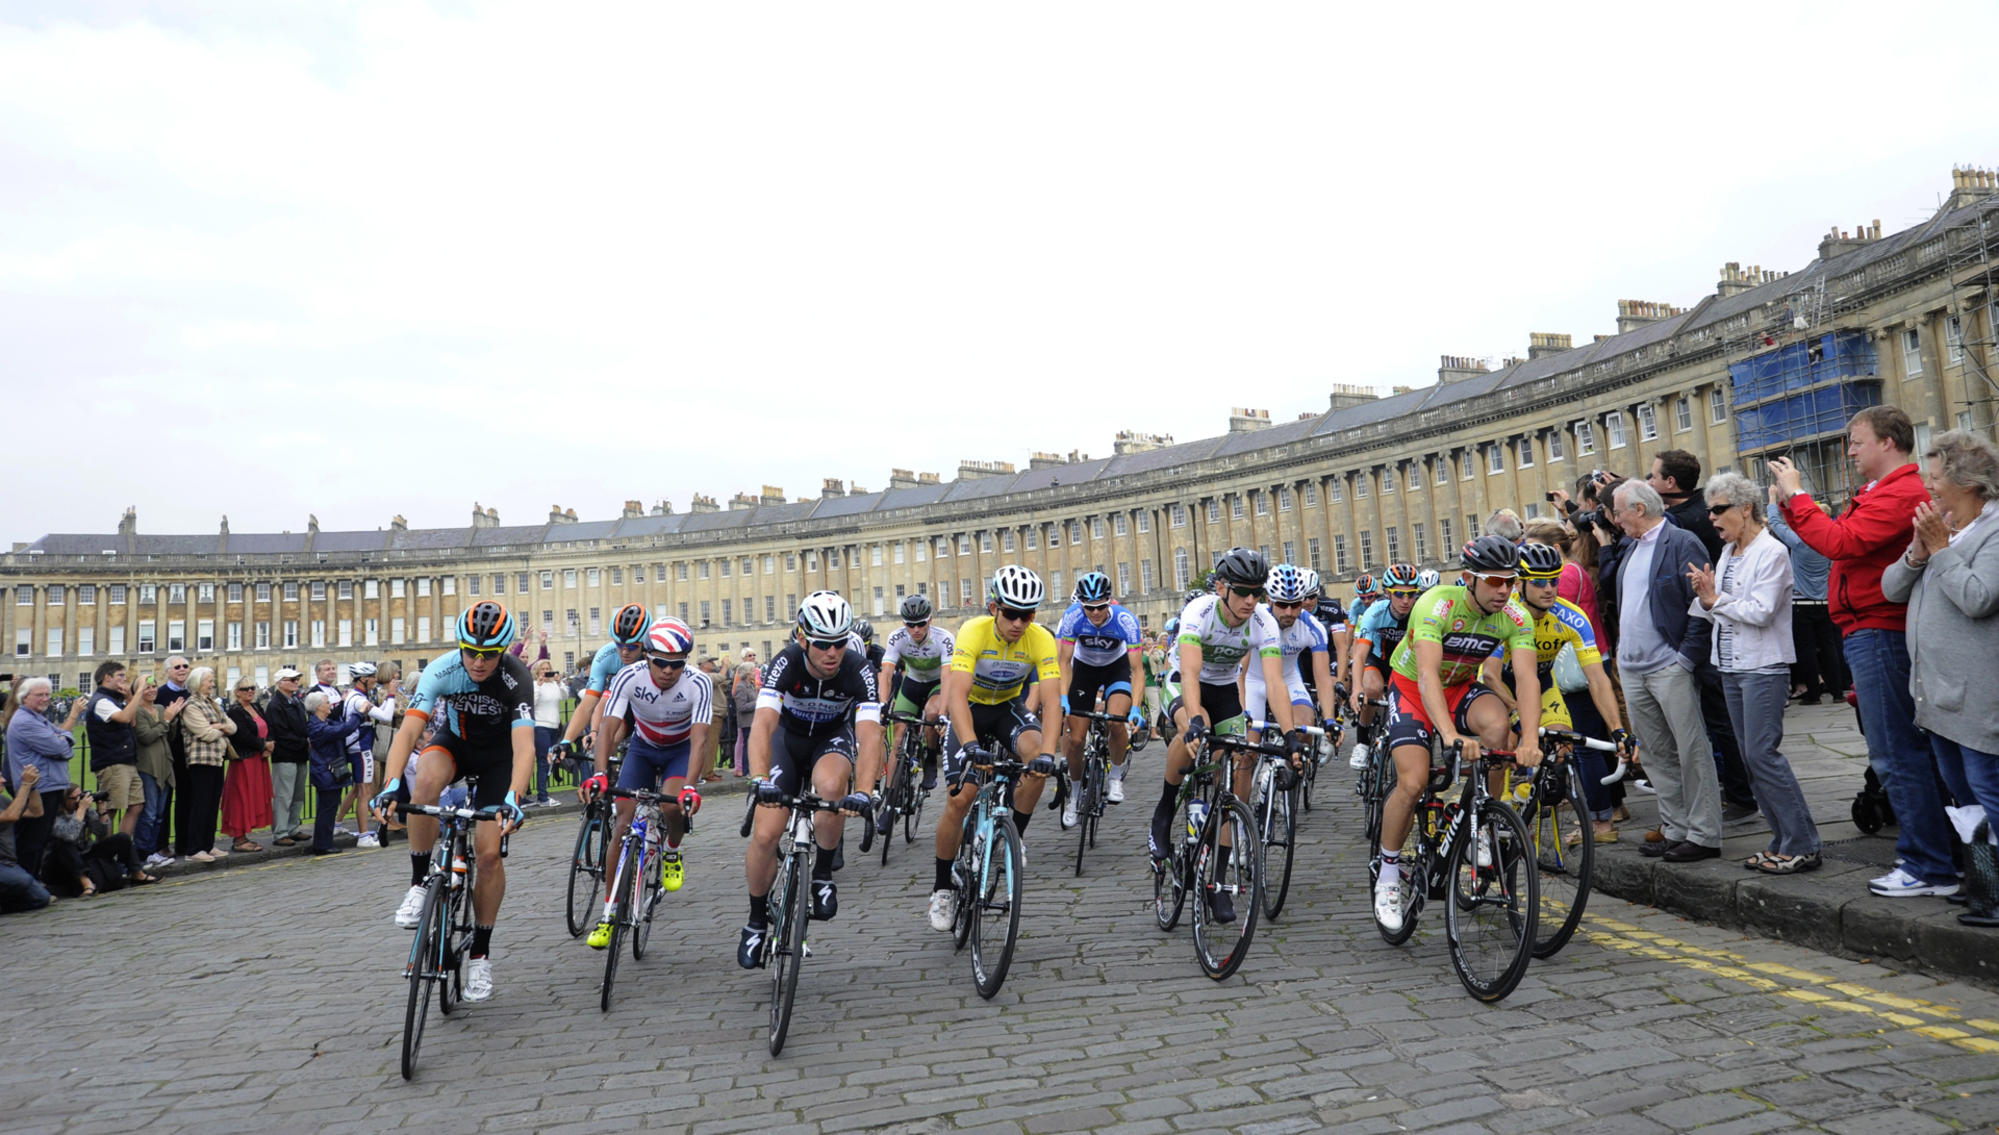 Tour of Britain taking place outside the royal crescent.